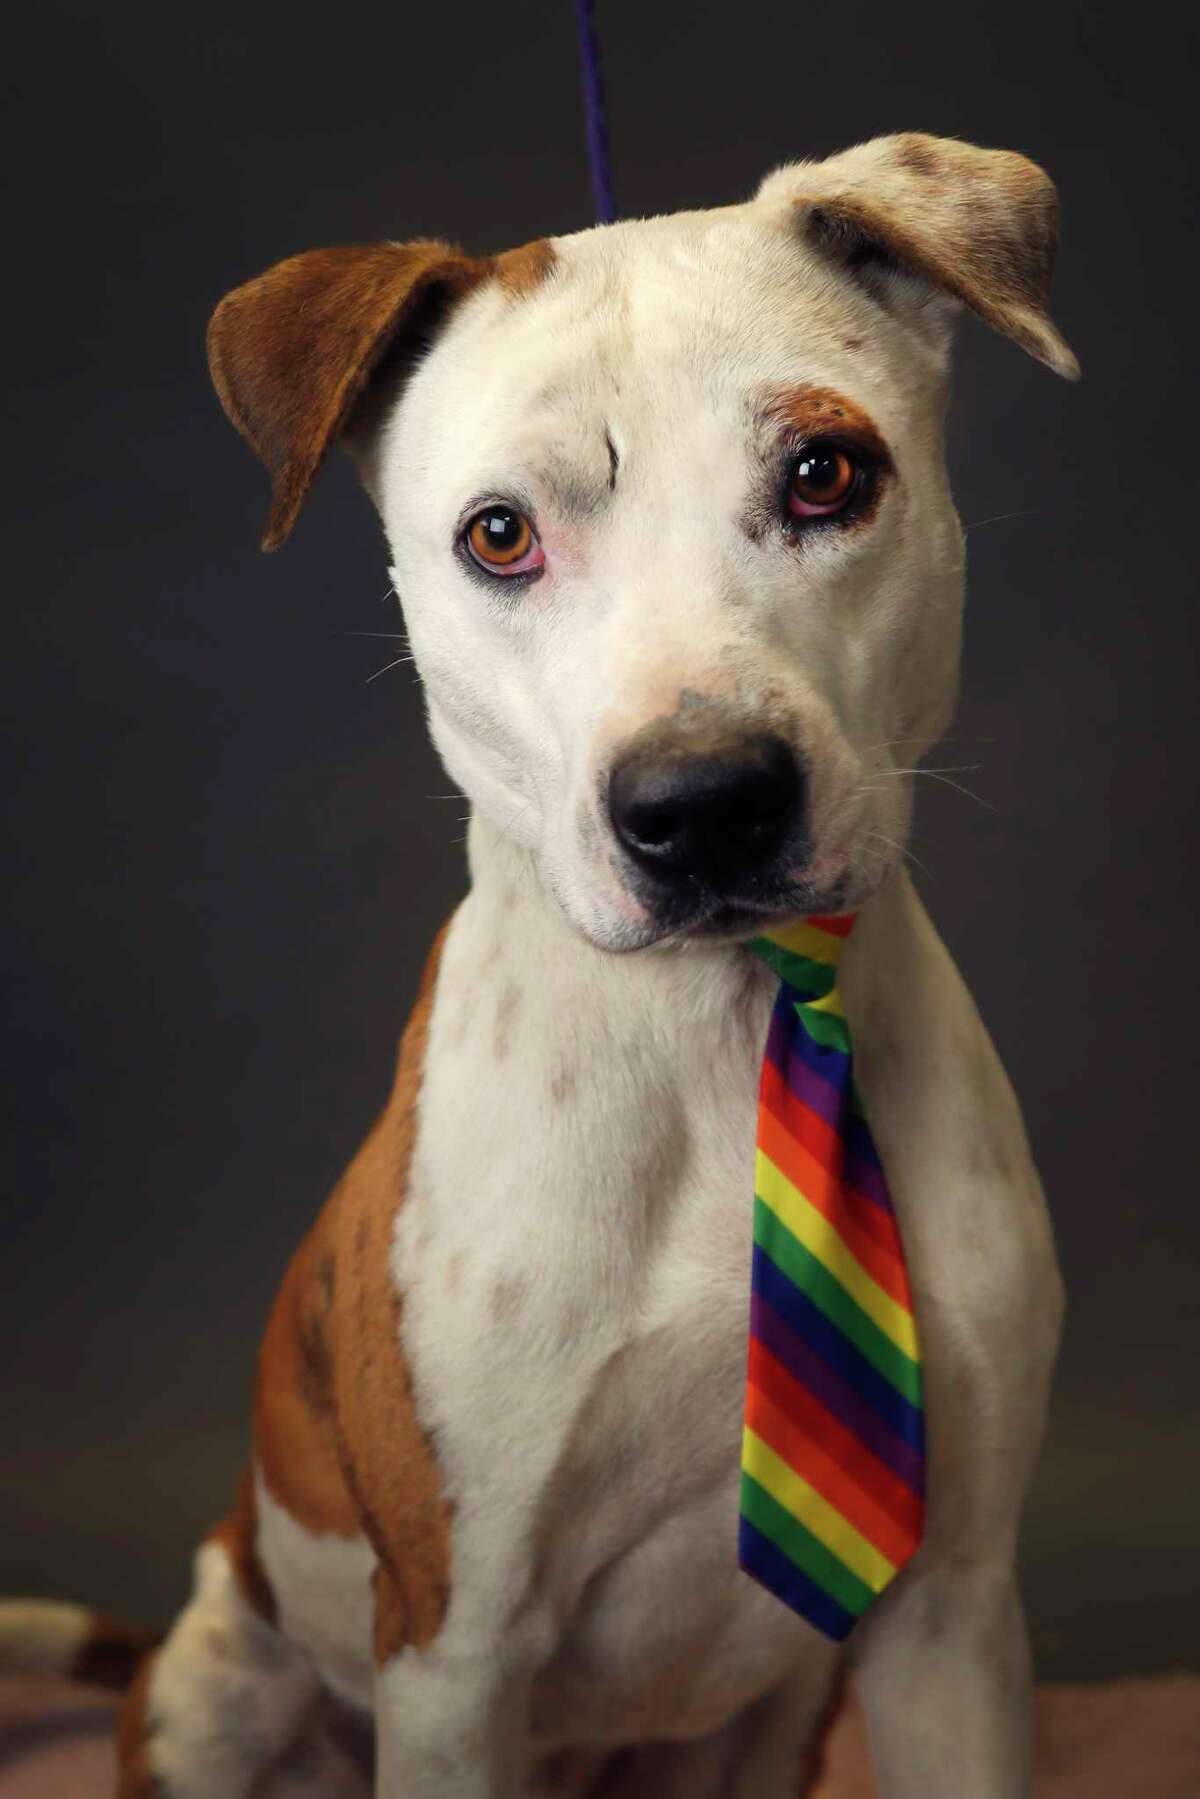 Conroe is a 1-year-old, male, Pit Bull mix and is ready to be adopted from Harris County Animal Shelter. (Animal ID: A525134) Photographed Tuesday, Jan. 15, 2019, in Houston.